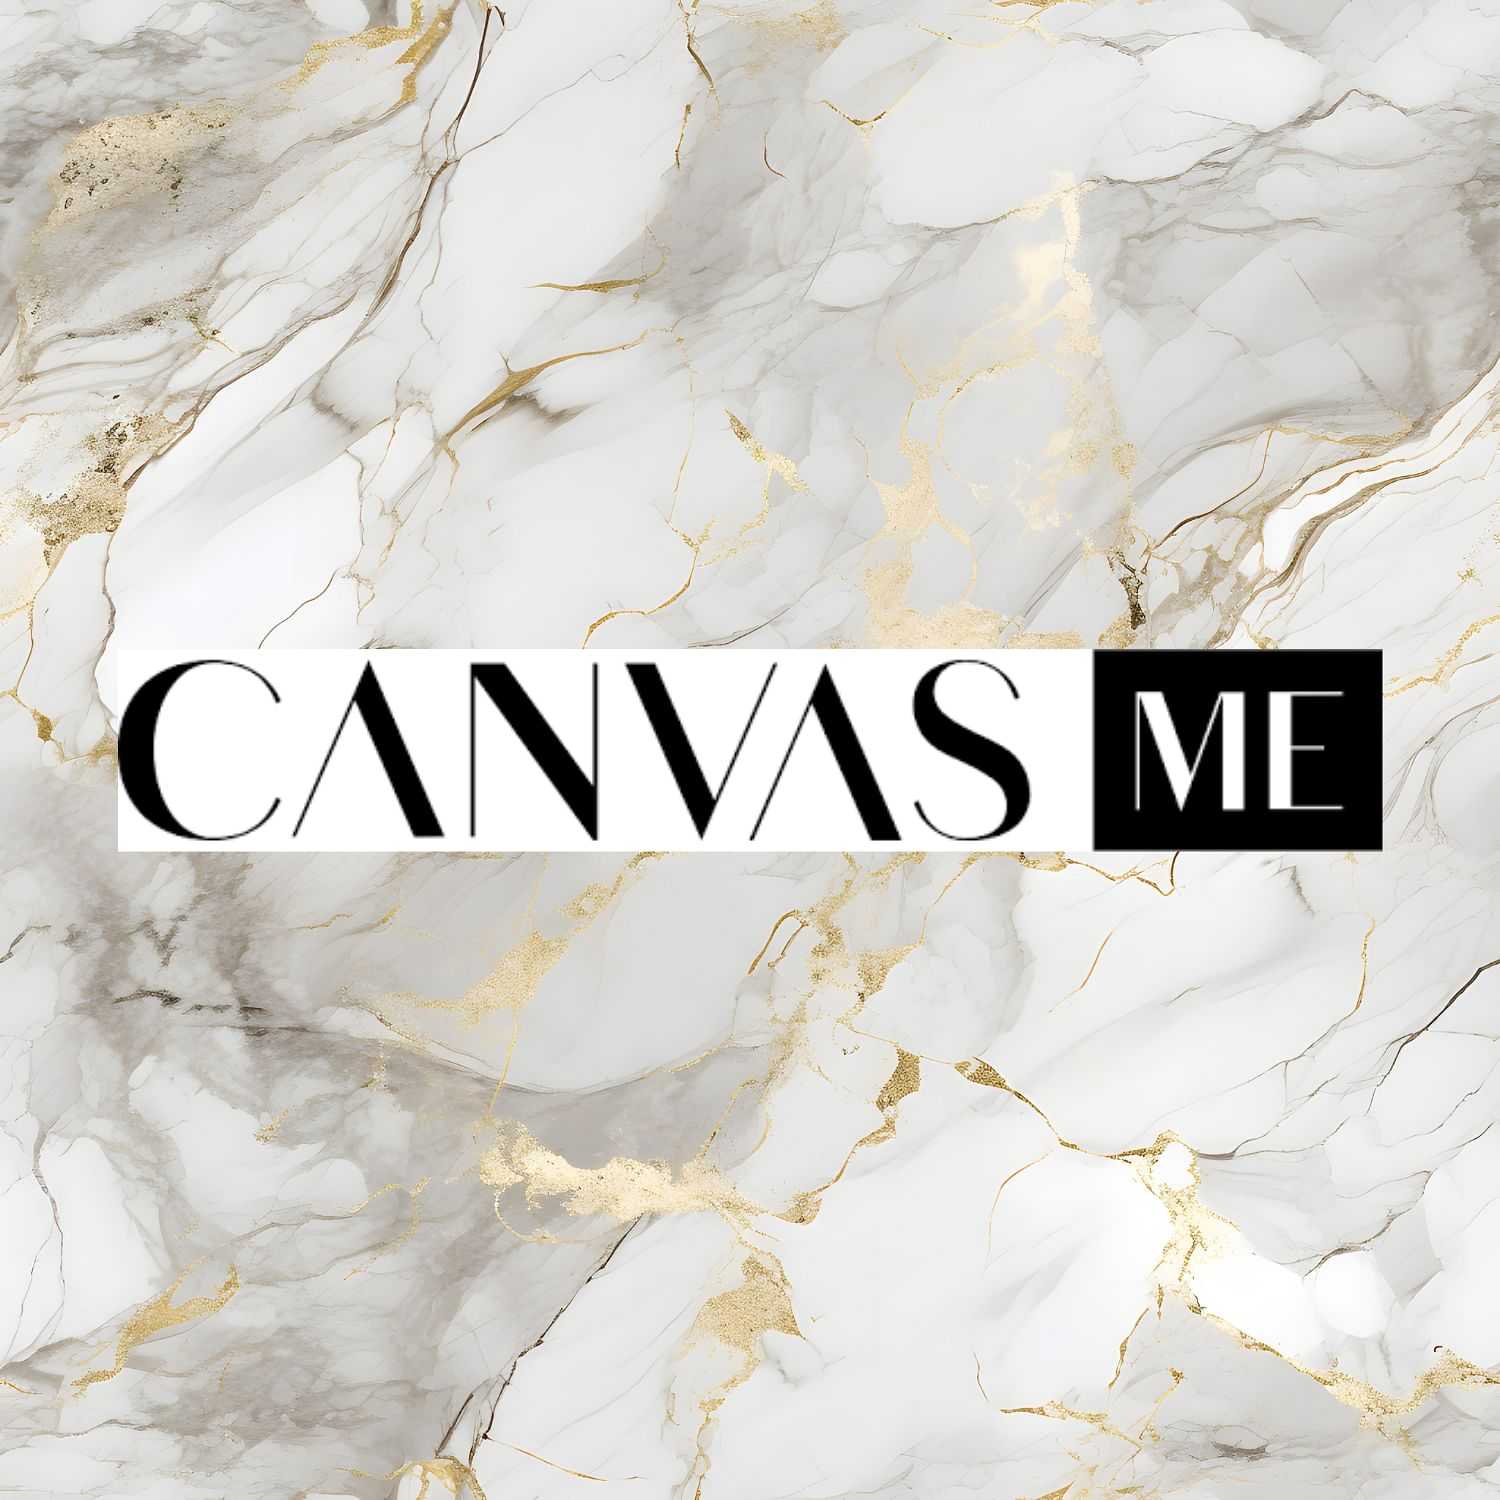 Marble background with gold veins and the text "CANVAS ME" in black font.